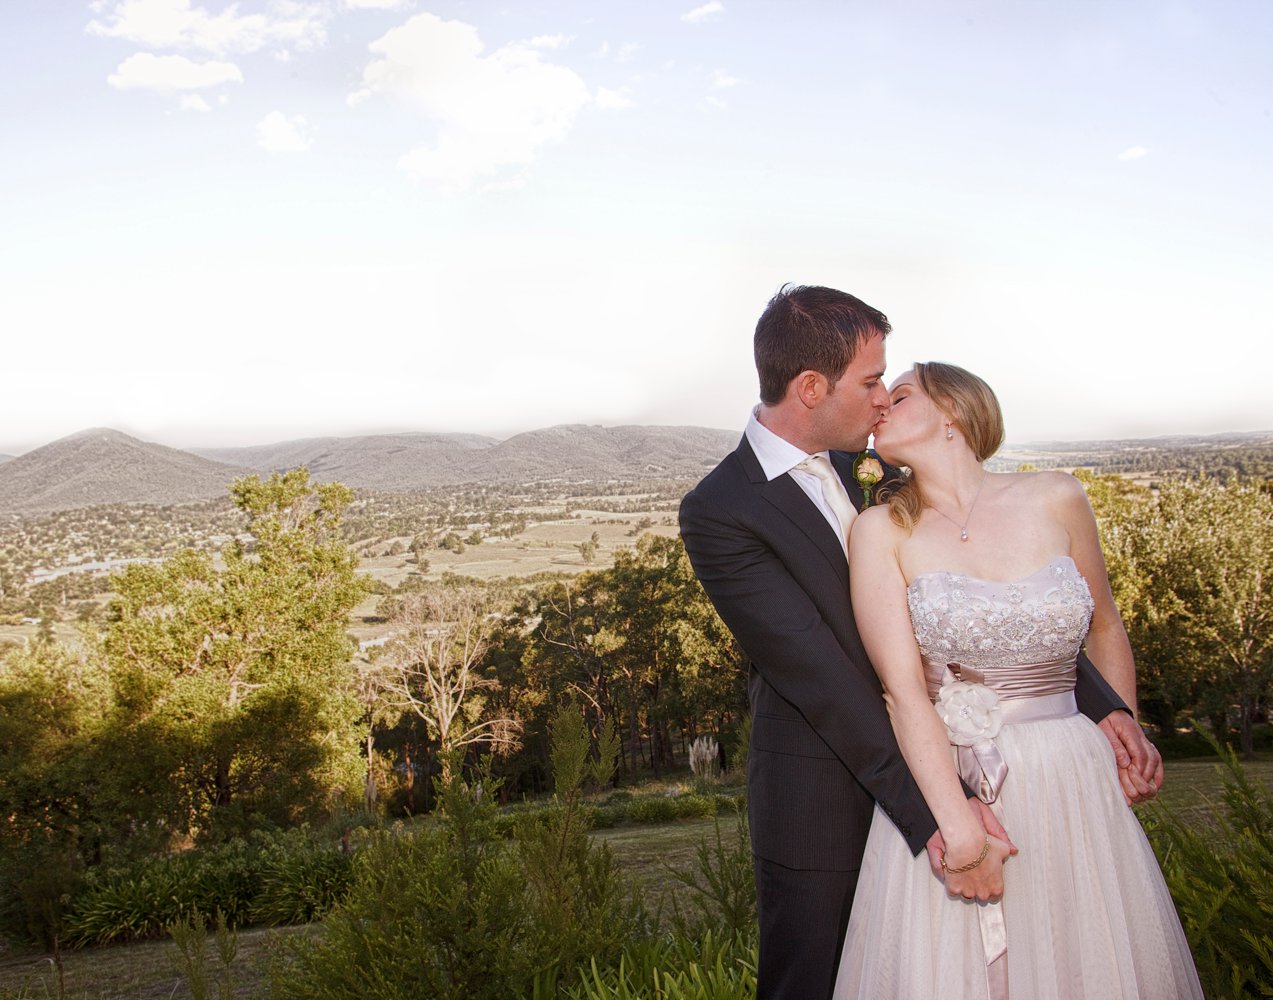 online wedding photo albums in Adelaide